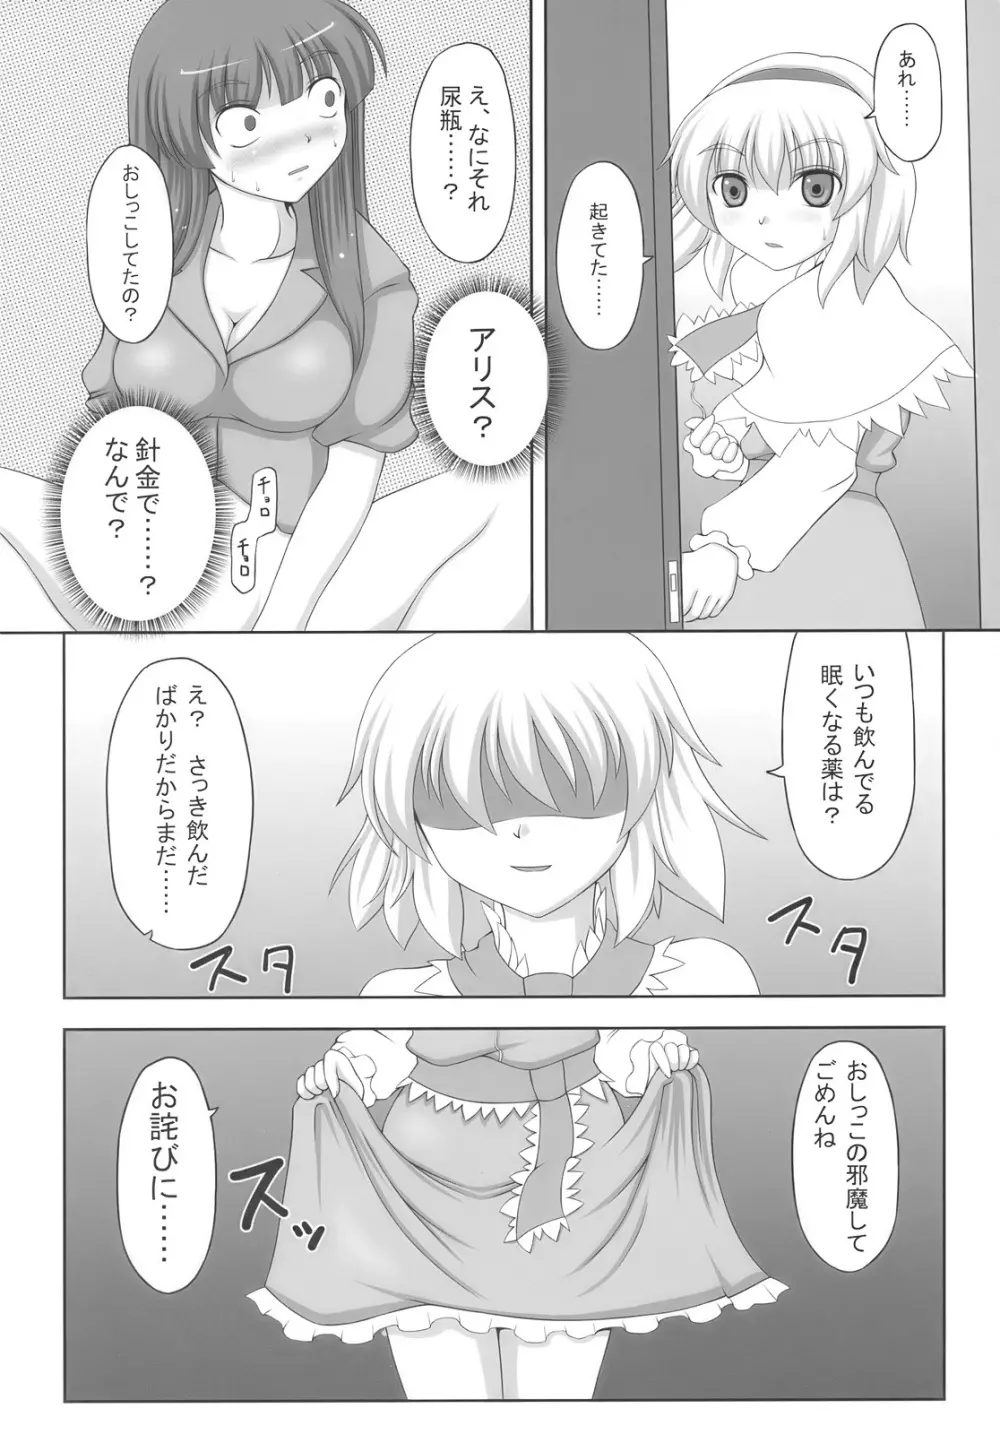 After tea time 6ページ